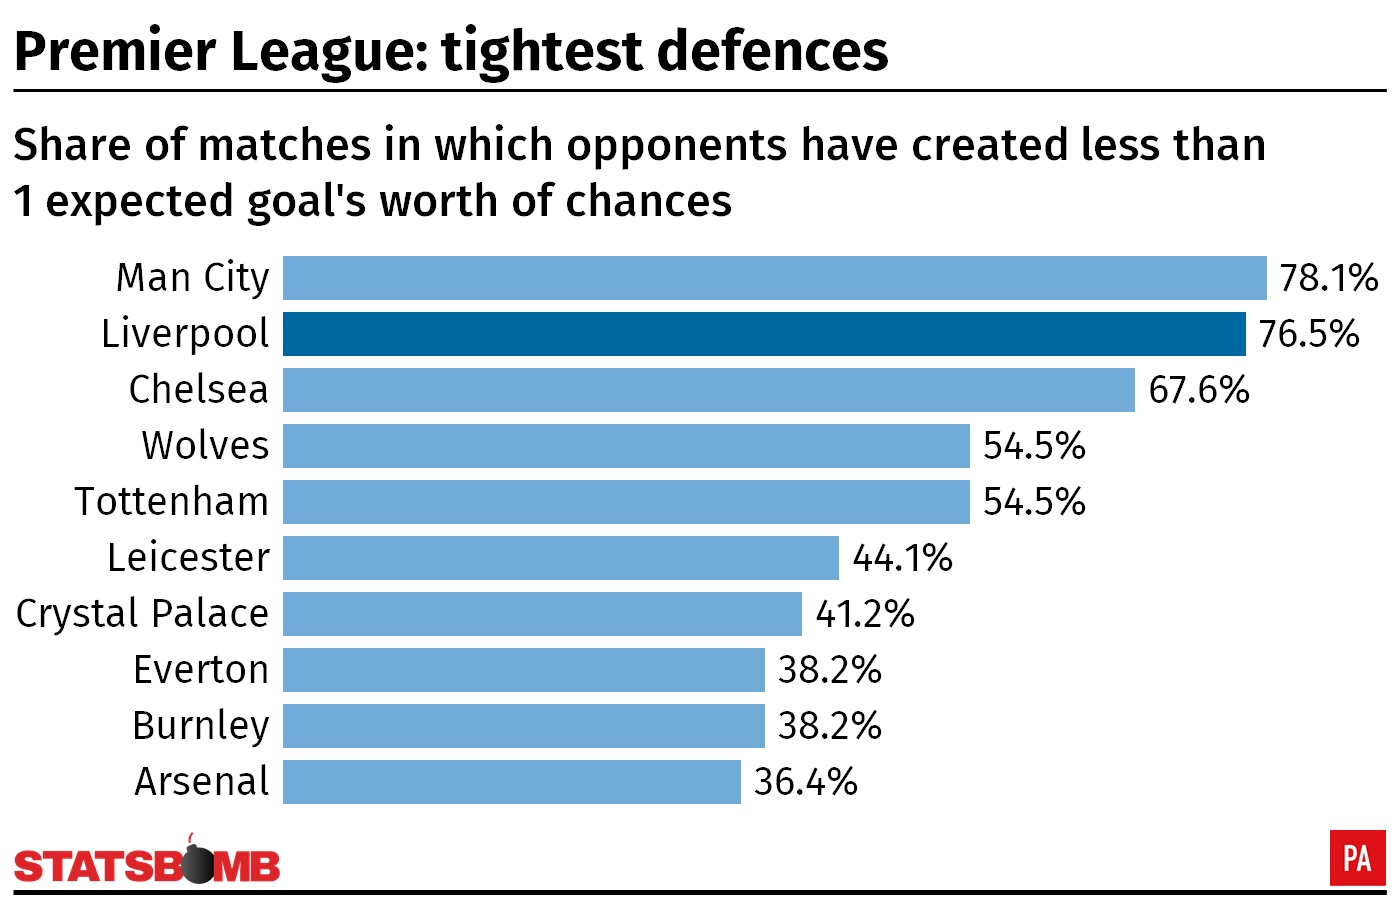 A table showing the tightest defences in the Premier League according to expected goals